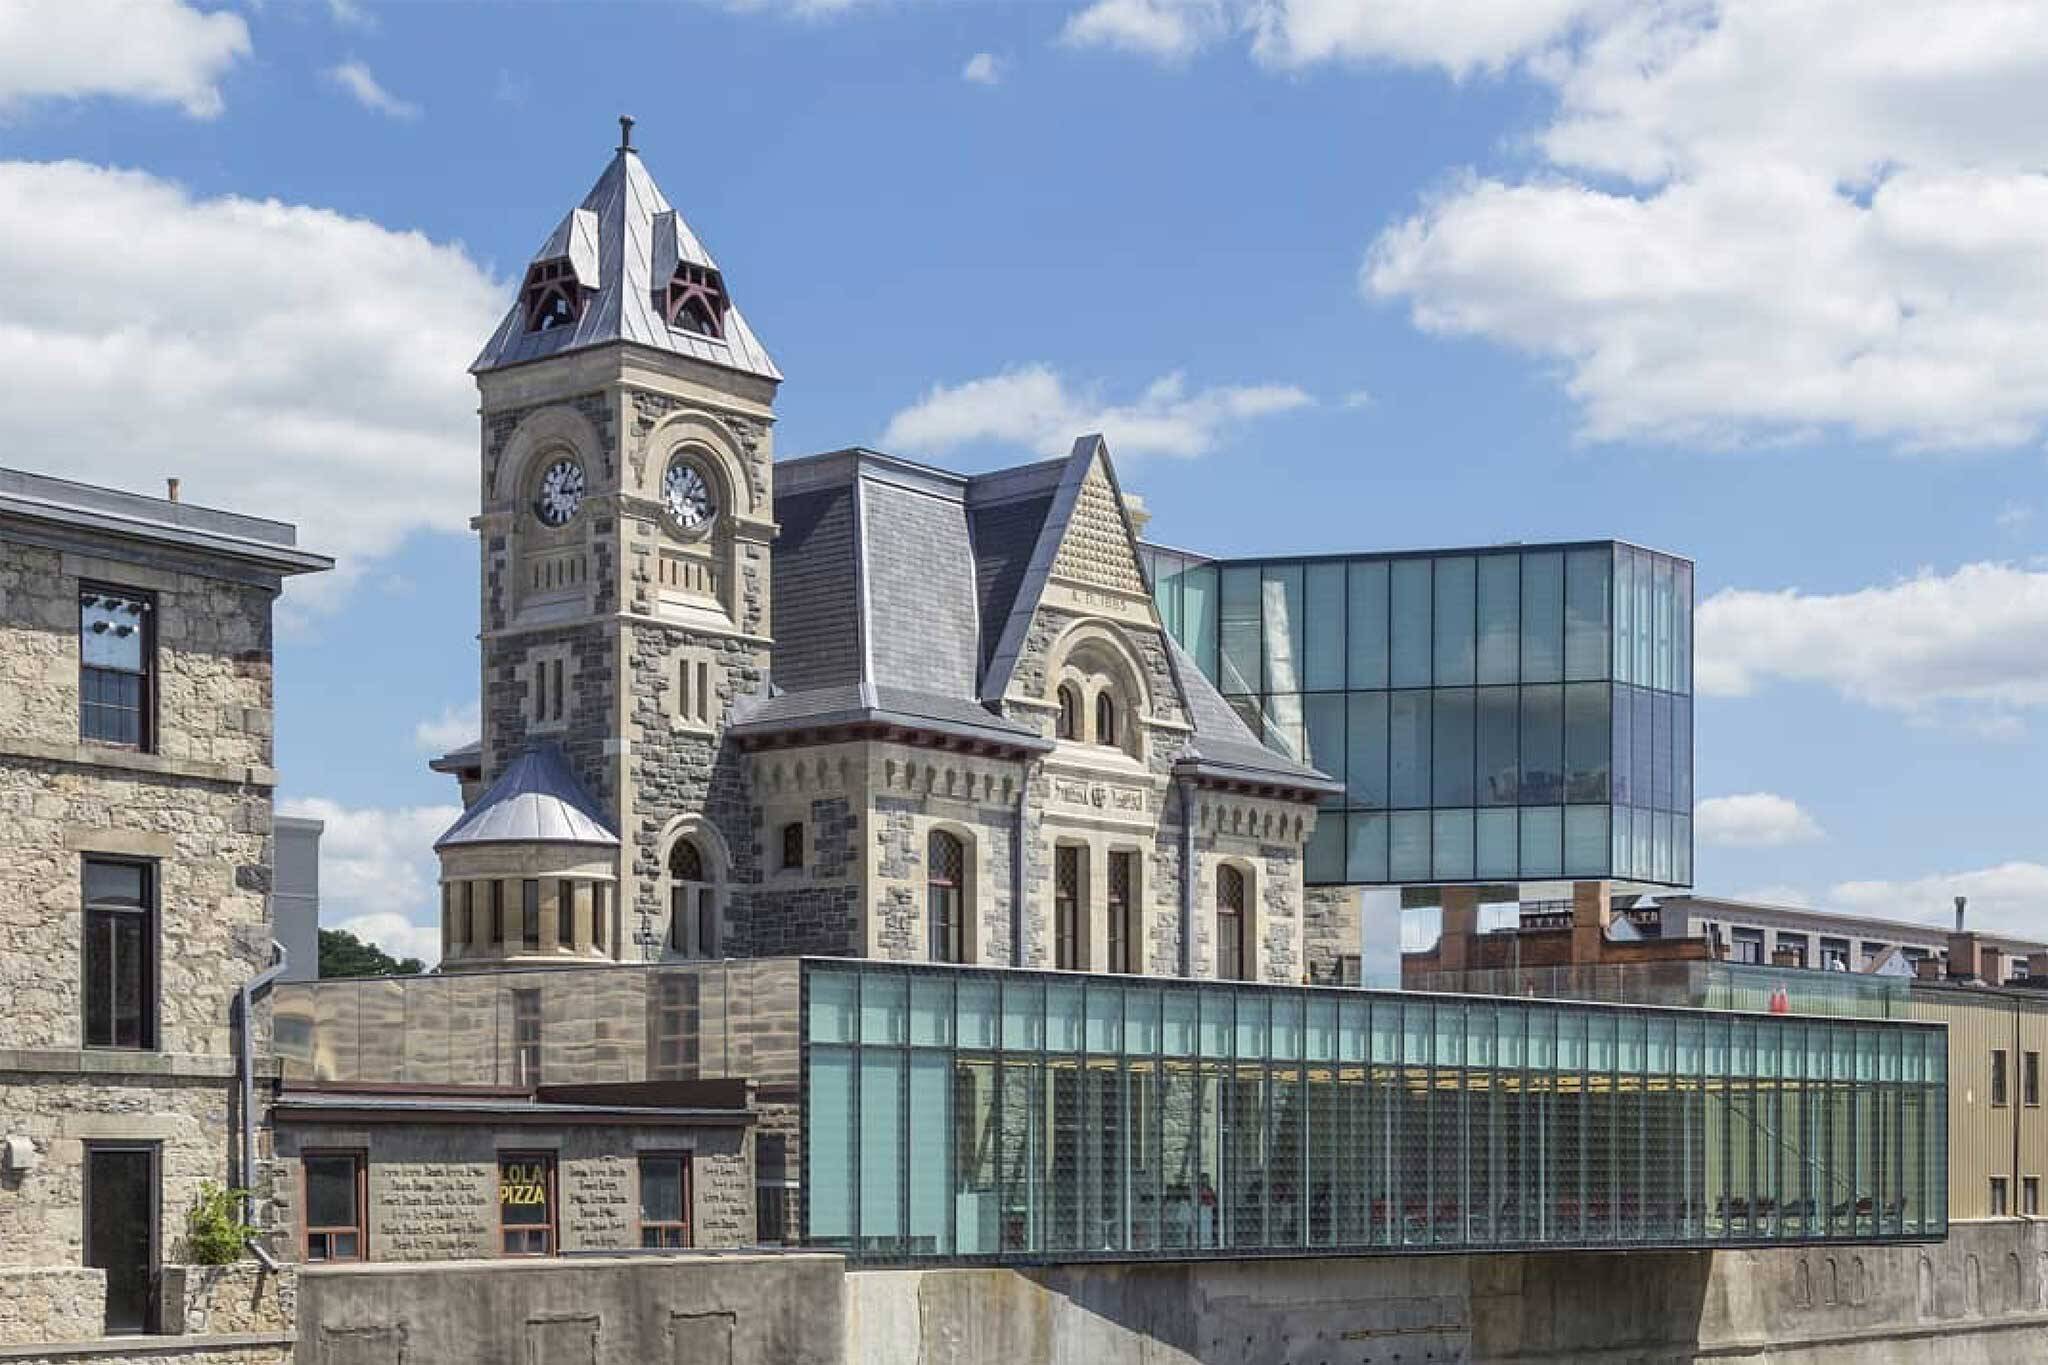 The Idea Exchange is an old post office that's also Canada's first